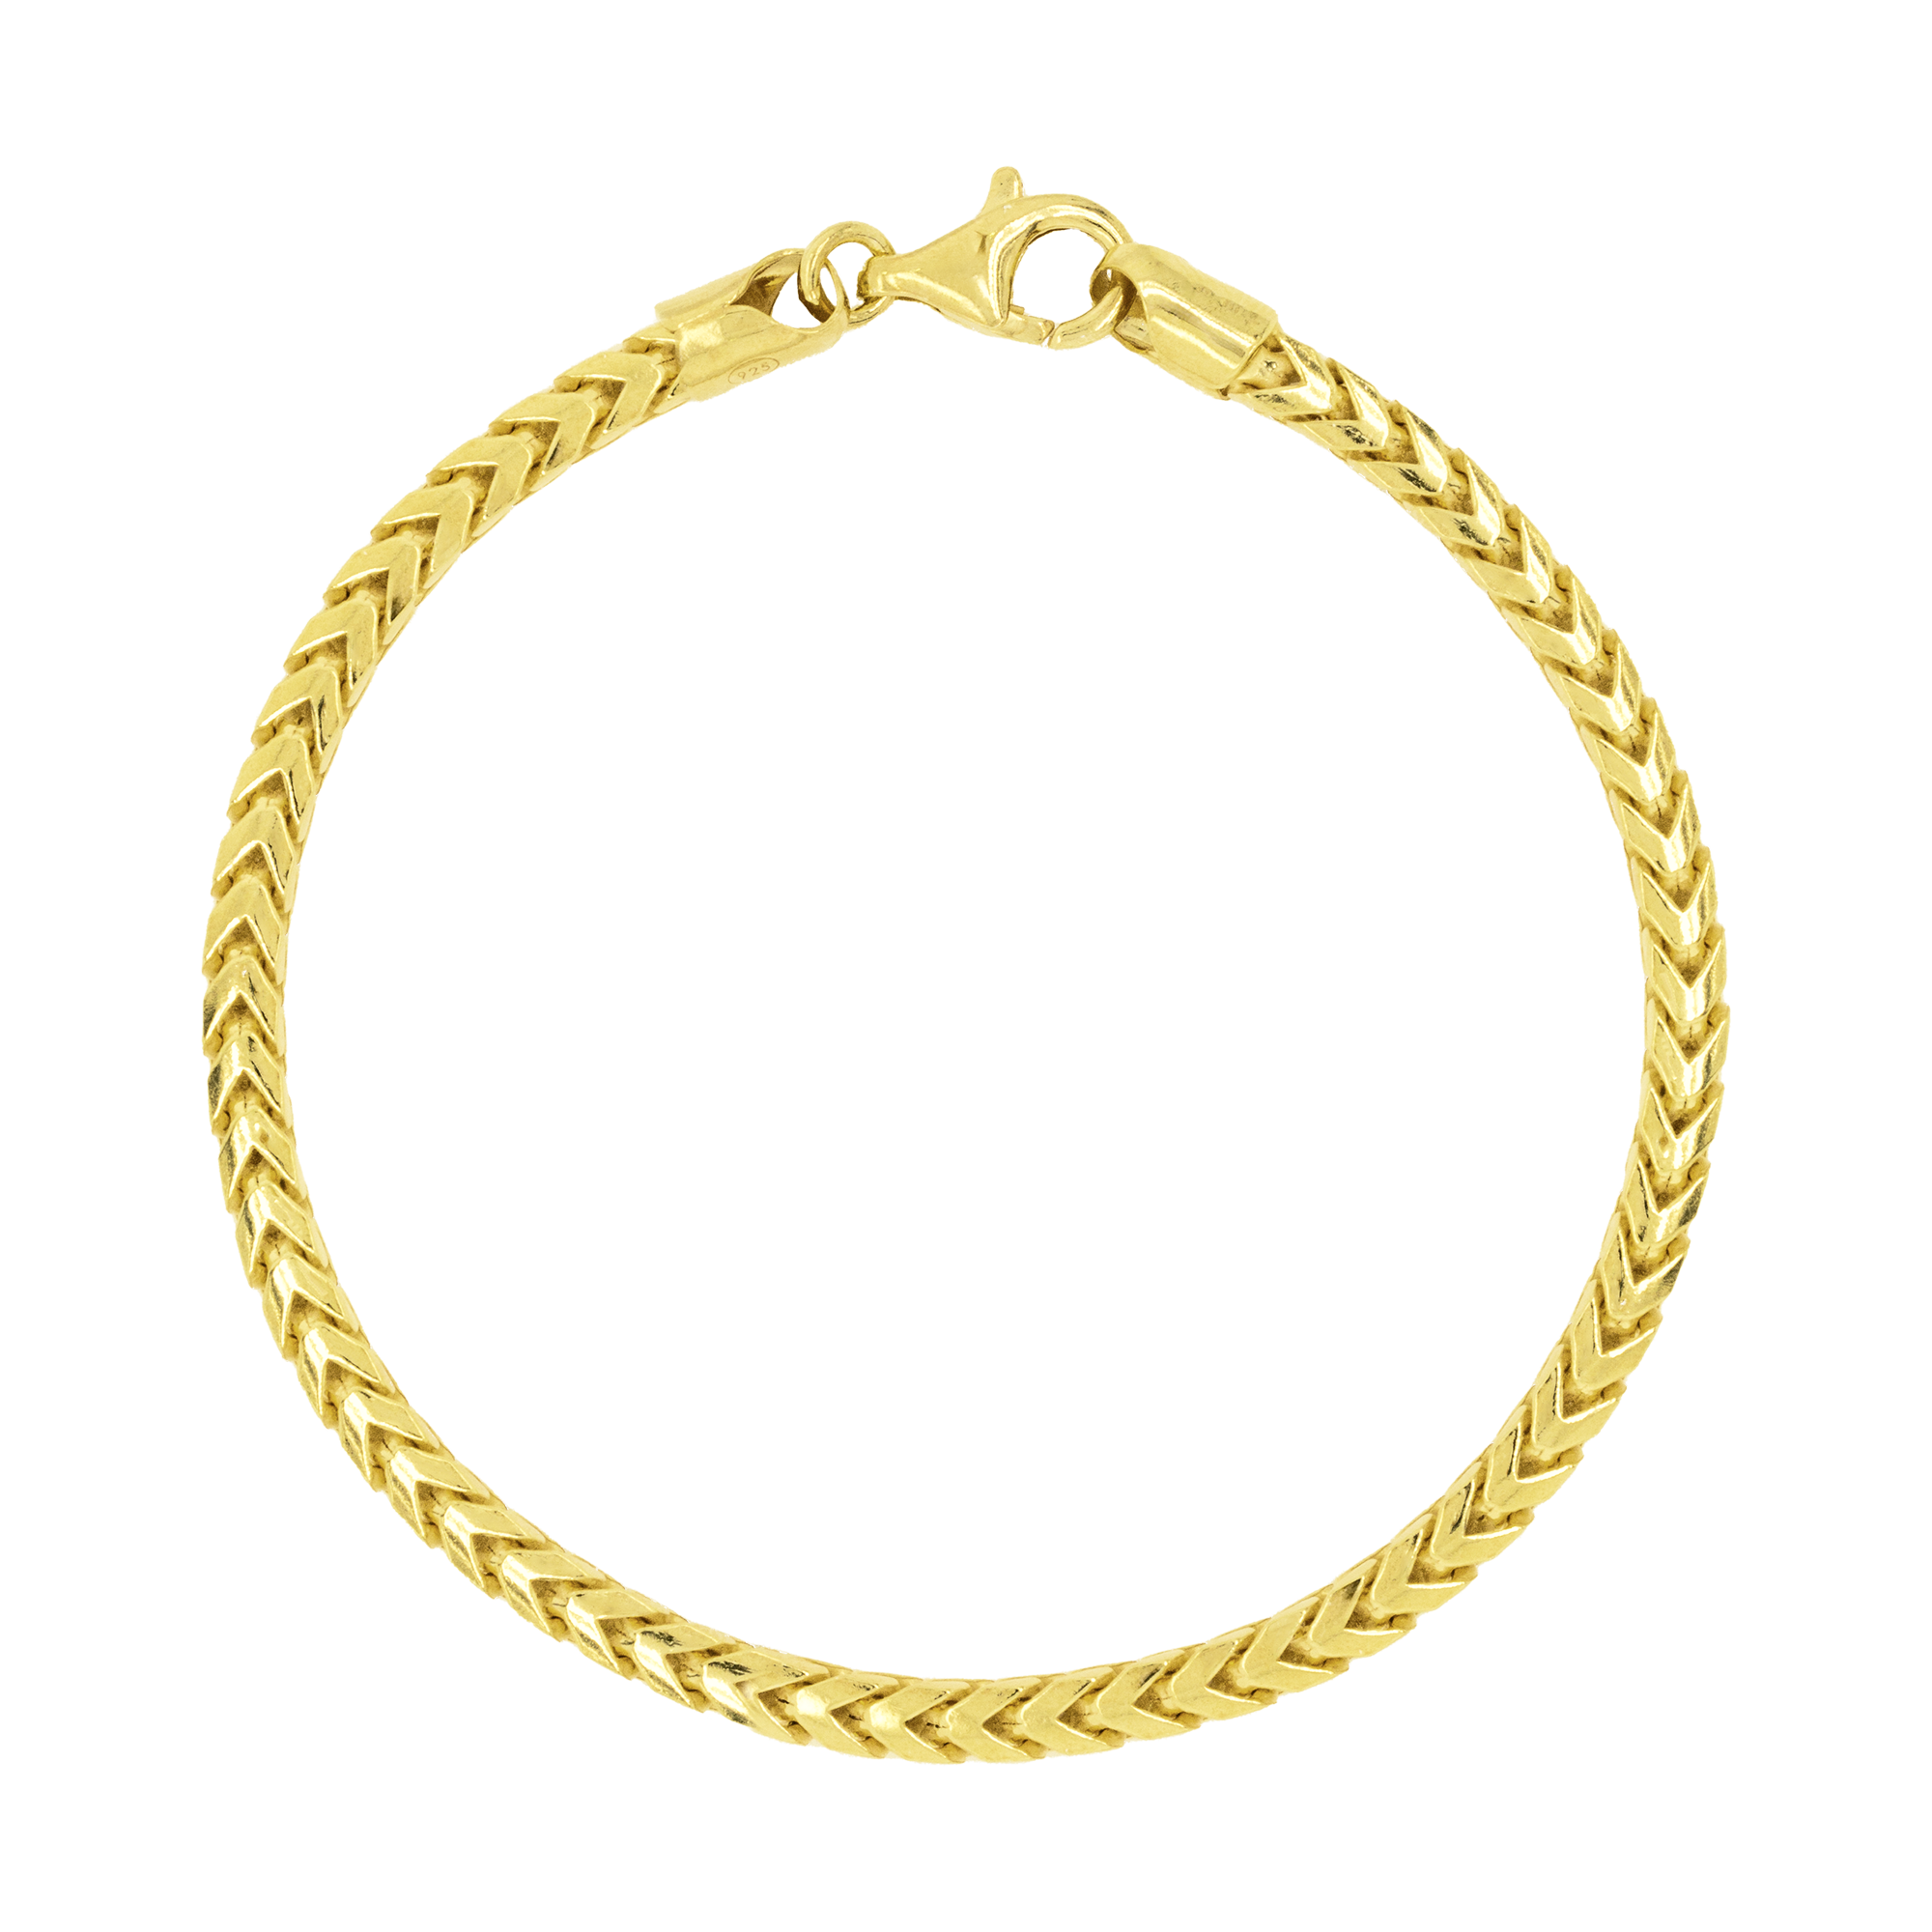 1 Gram Gold Plated Sachin Best Quality Attractive Design Chain For Men -  Style C363 at Rs 4320.00 | सोना चढ़ाया चेन - Soni Fashion, Rajkot | ID:  2850416670591